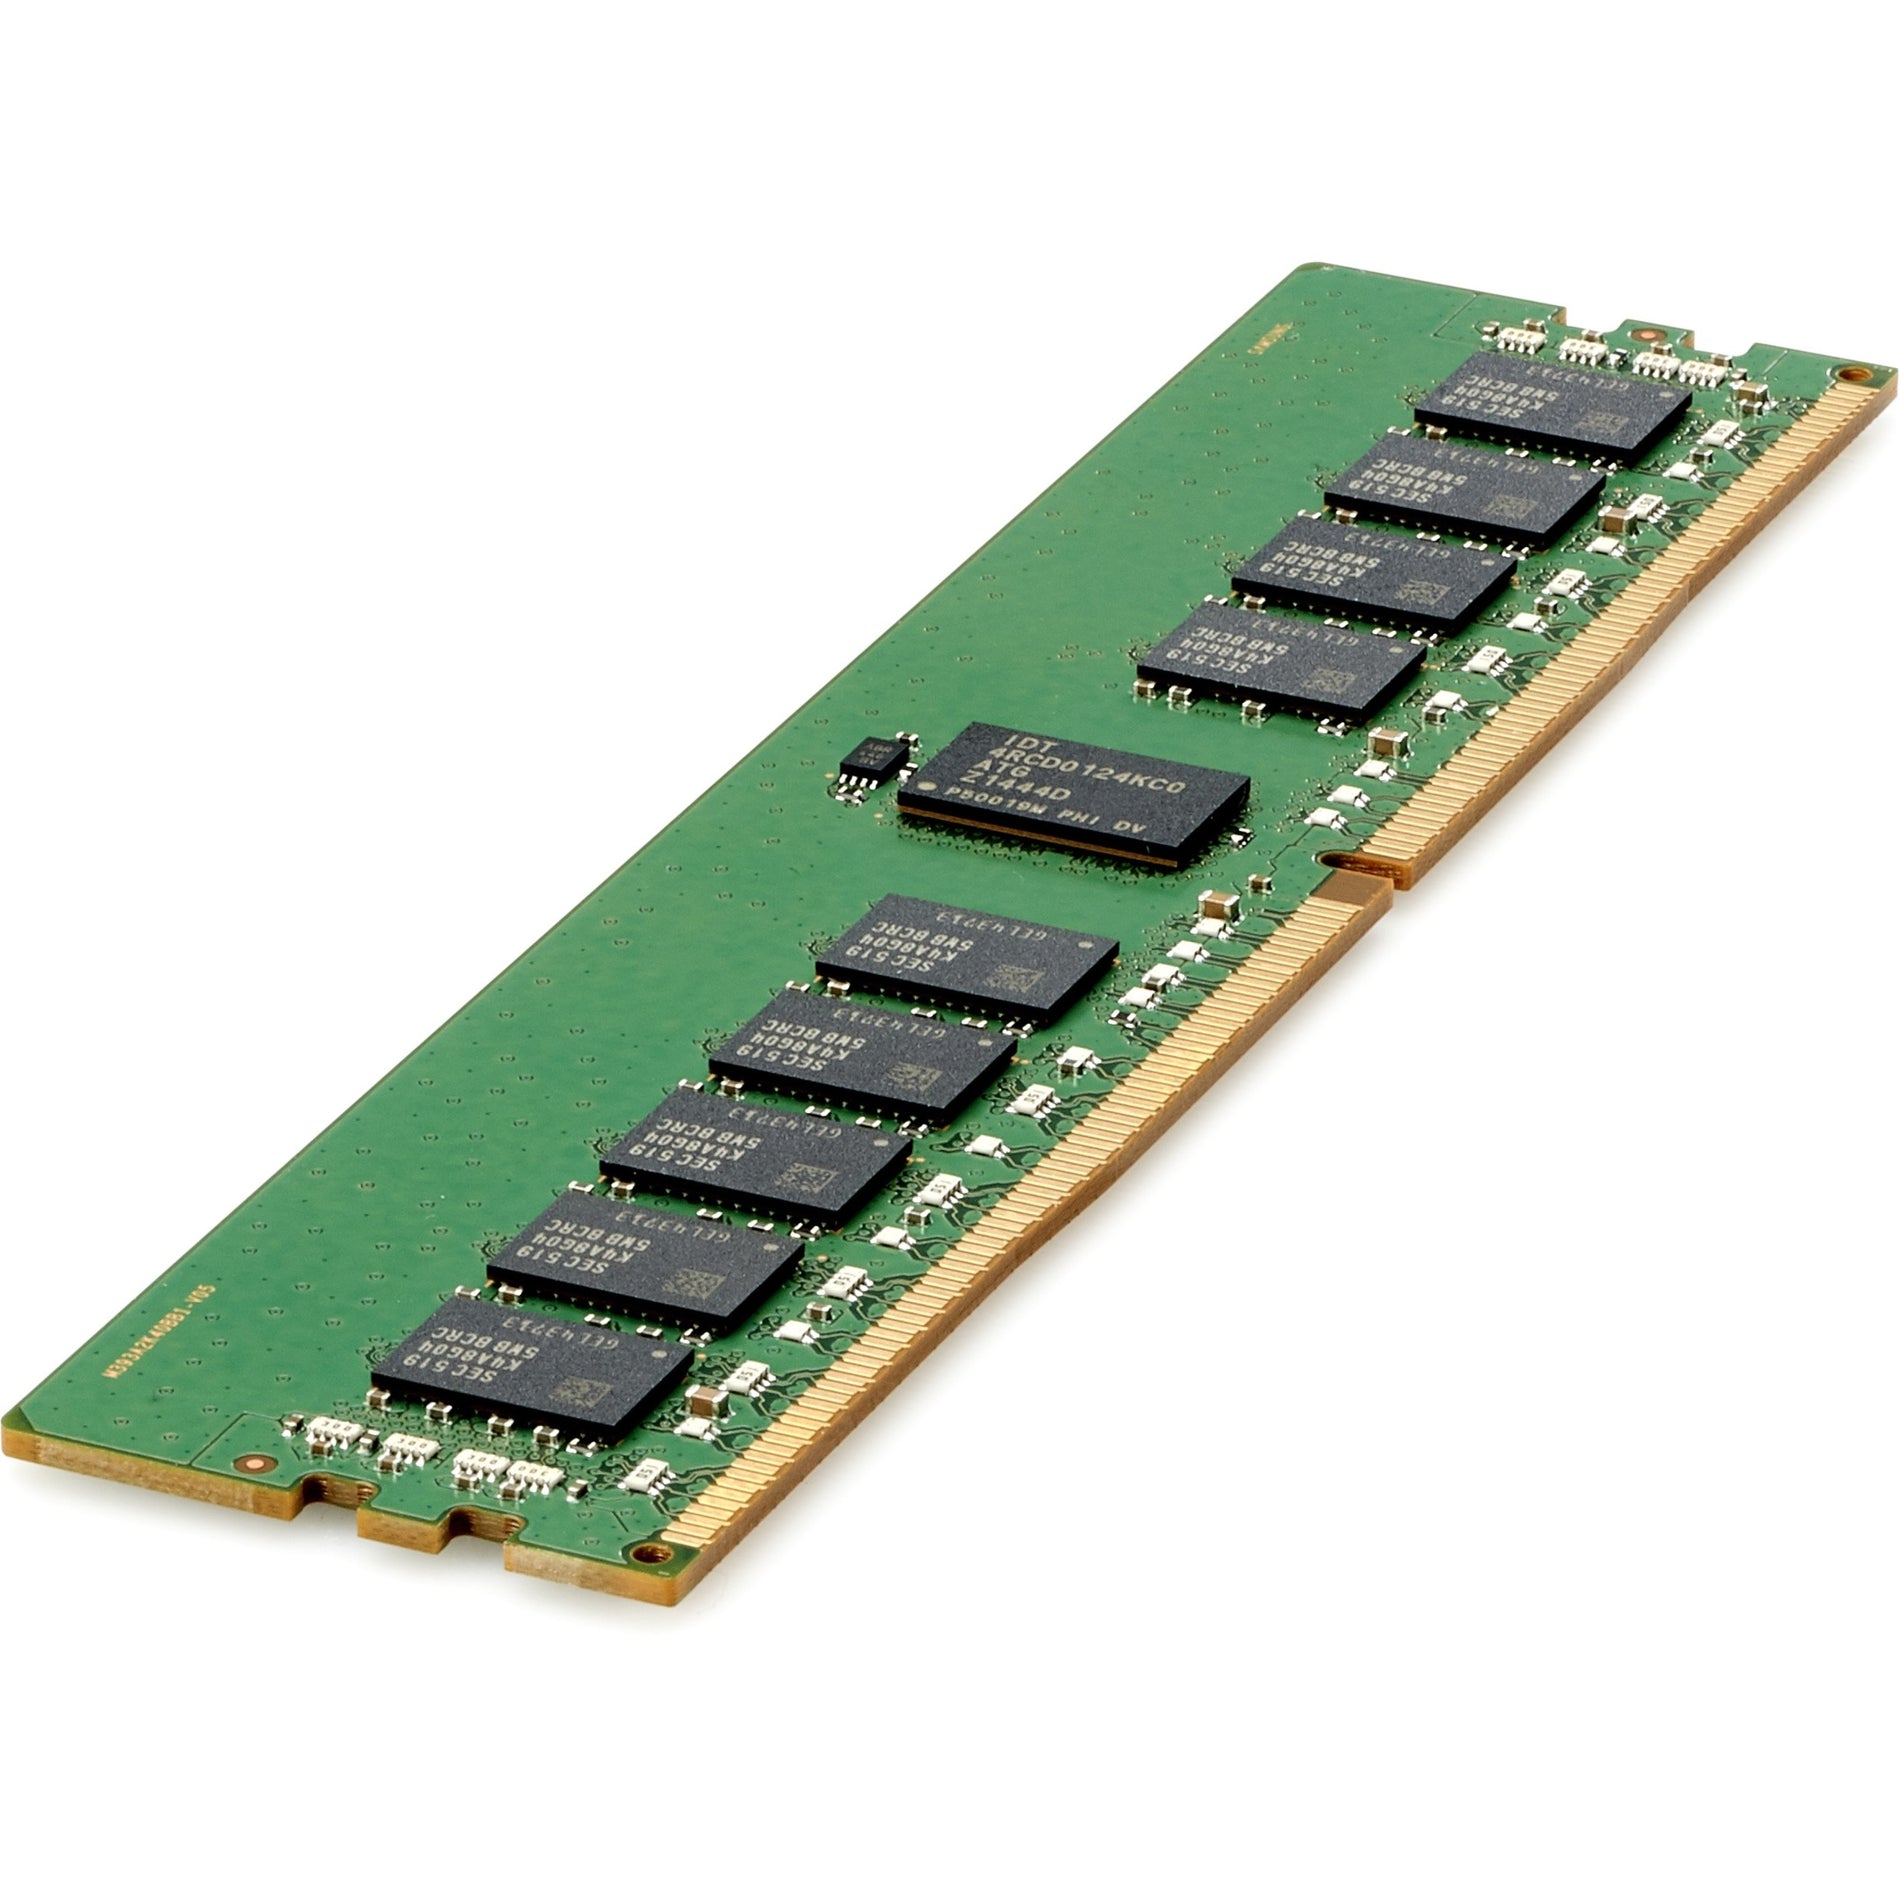 HPE Sourcing 805351-B21 32GB (1x32GB) Dual Rank x4 DDR4-2400 CAS-17-17-17 Registered Memory Kit, for HPE ProLiant Gen9 Server, Apollo Family, Synergy Products, HPE Blade Systems